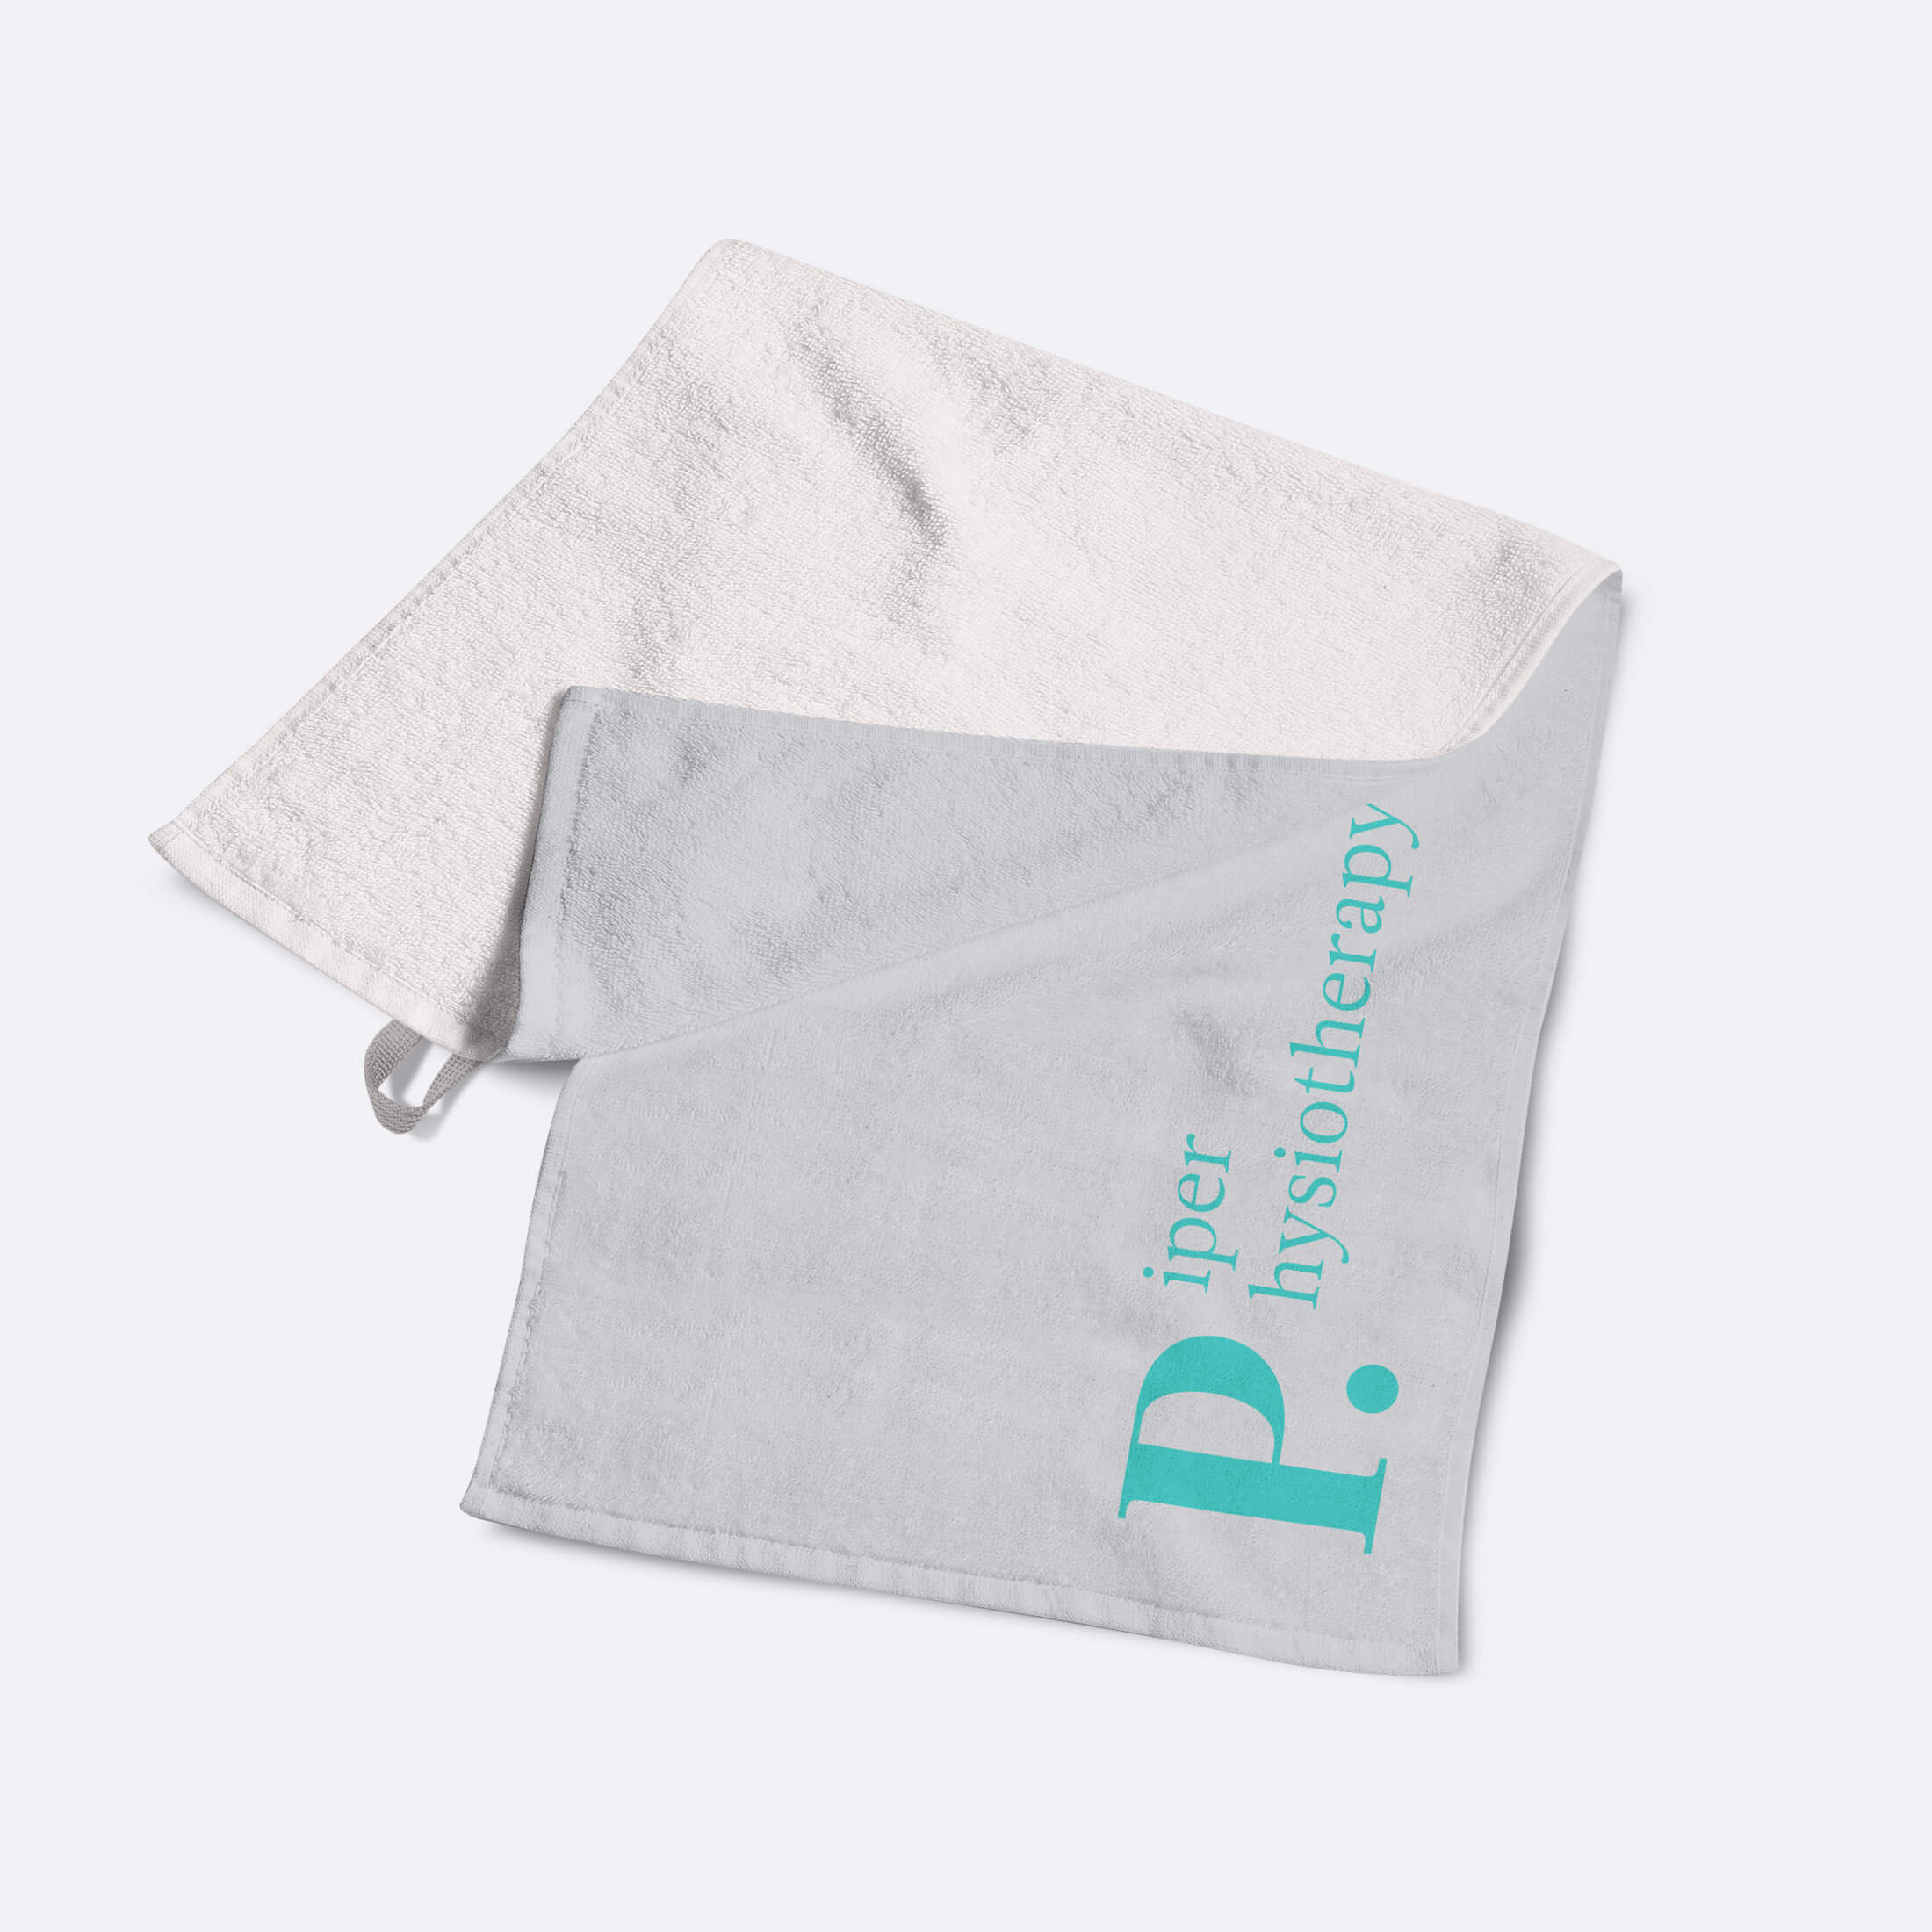 Personalised brand towel for physiotherapy brand